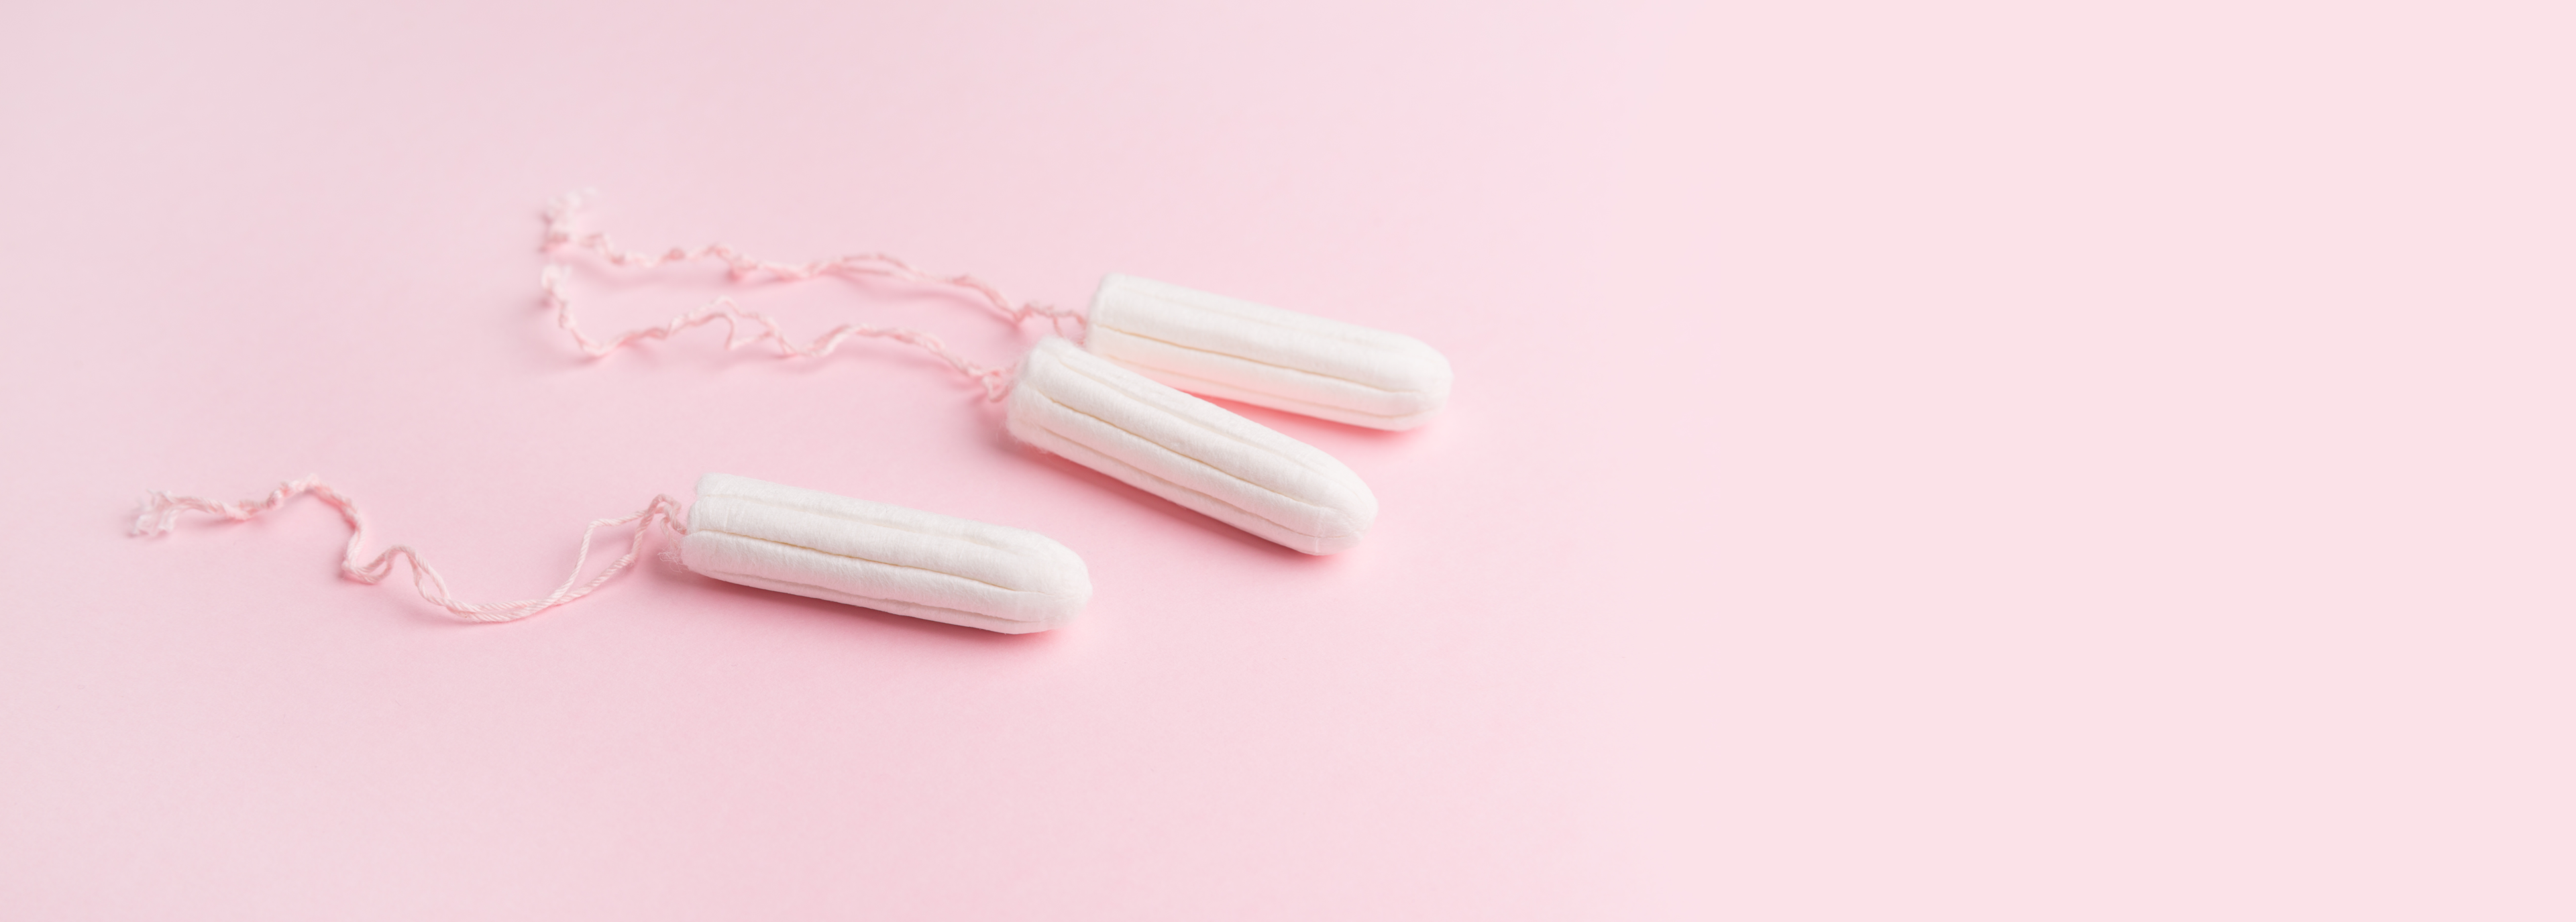 Tampons: A rap discourse 🙅‍♀️ Did you know the average tampons contains;  😵Chlorine, used to bleach them which disrupt vagin